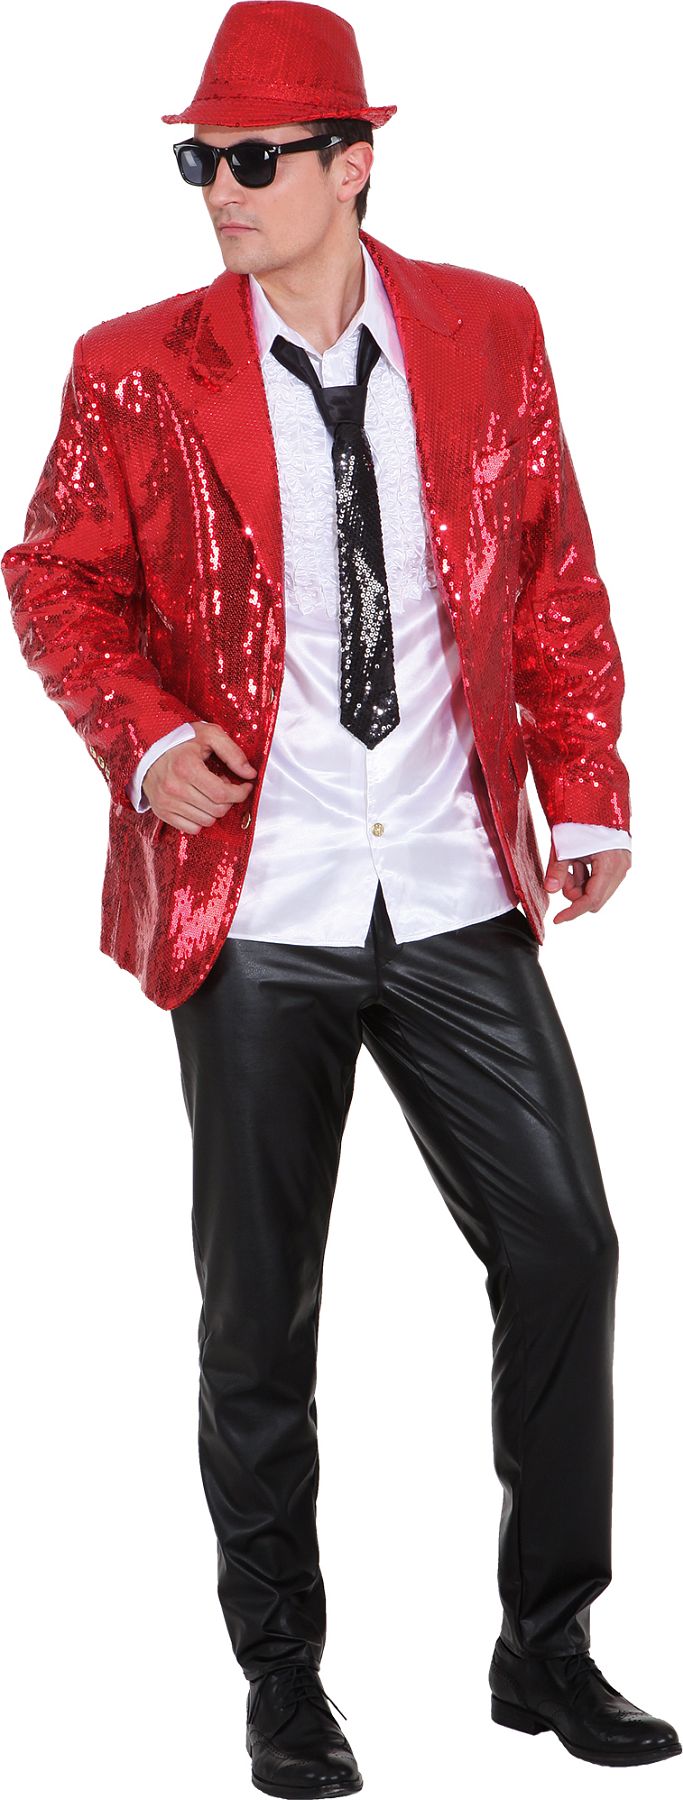 Show jacket, red